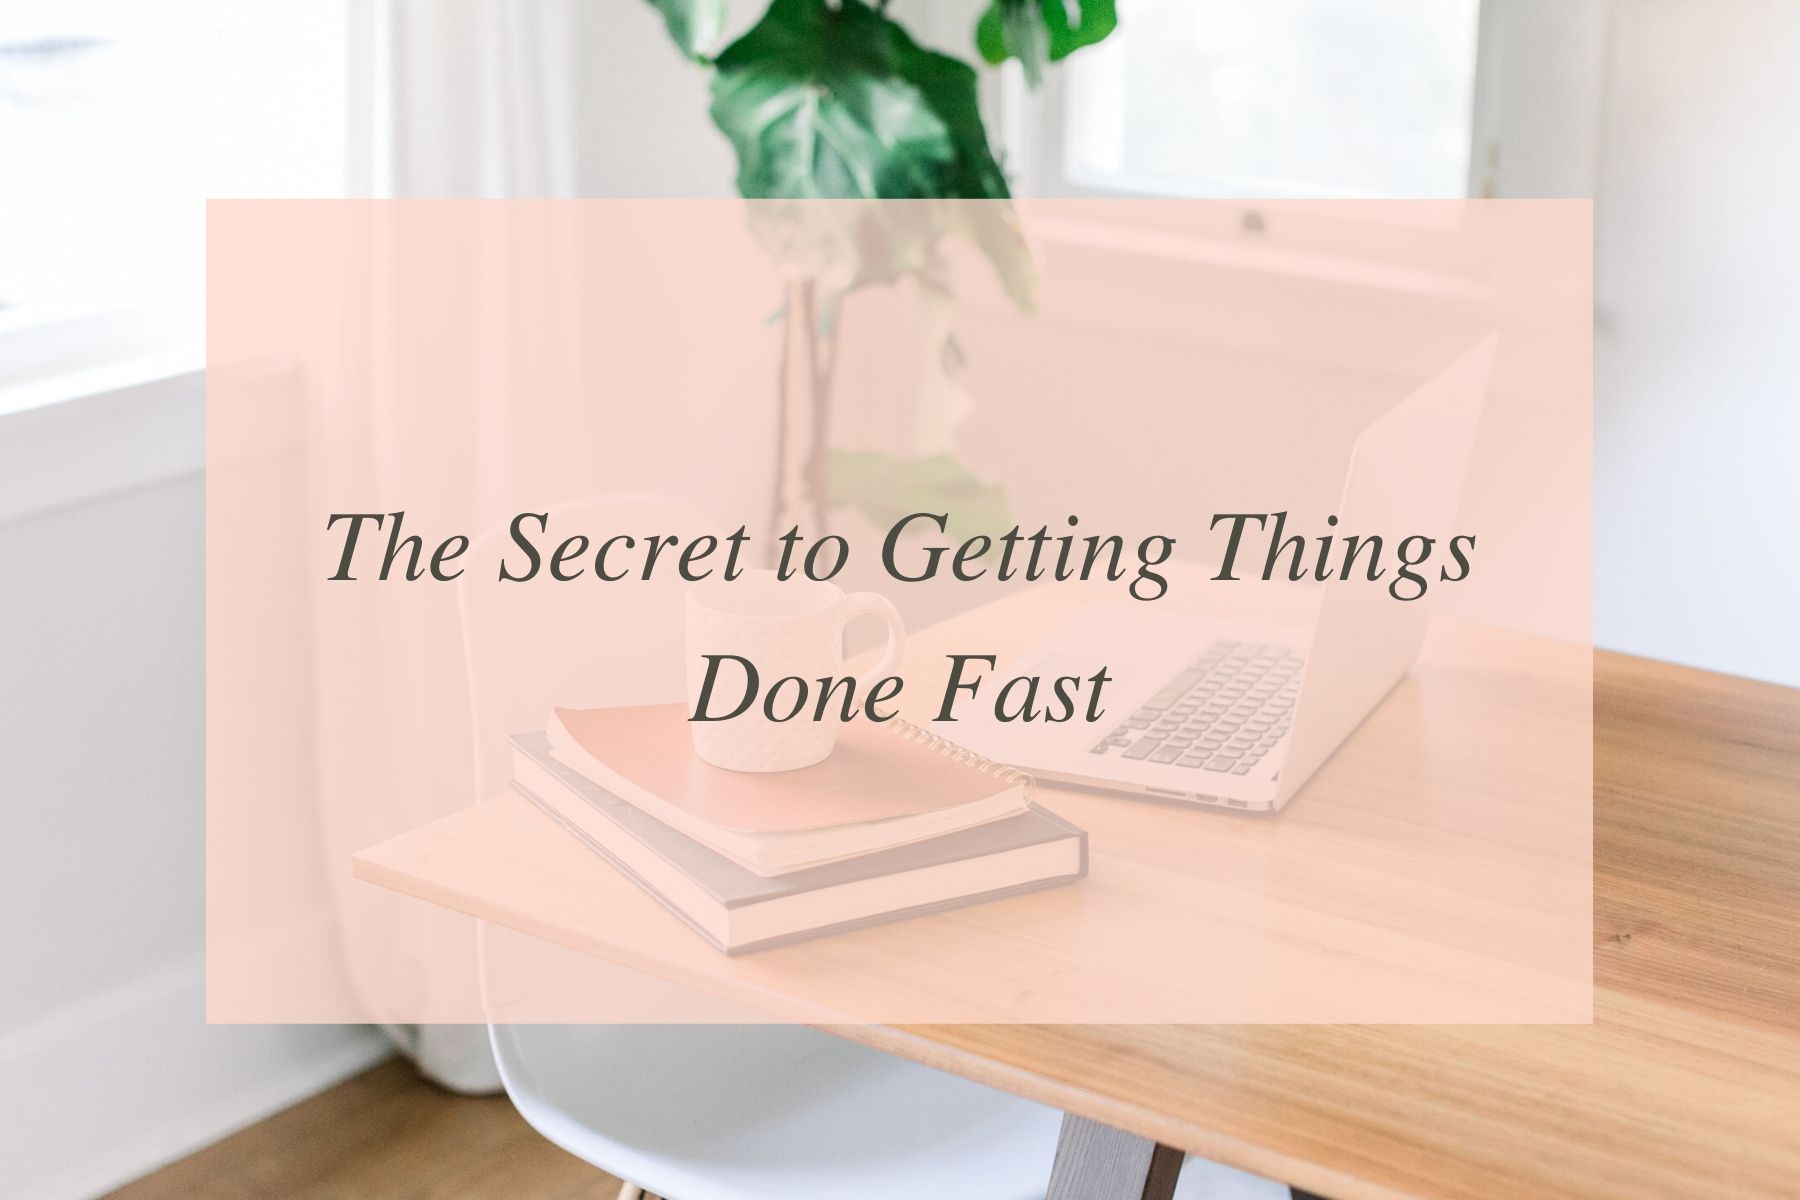 The Secret to Getting Things Done Fast